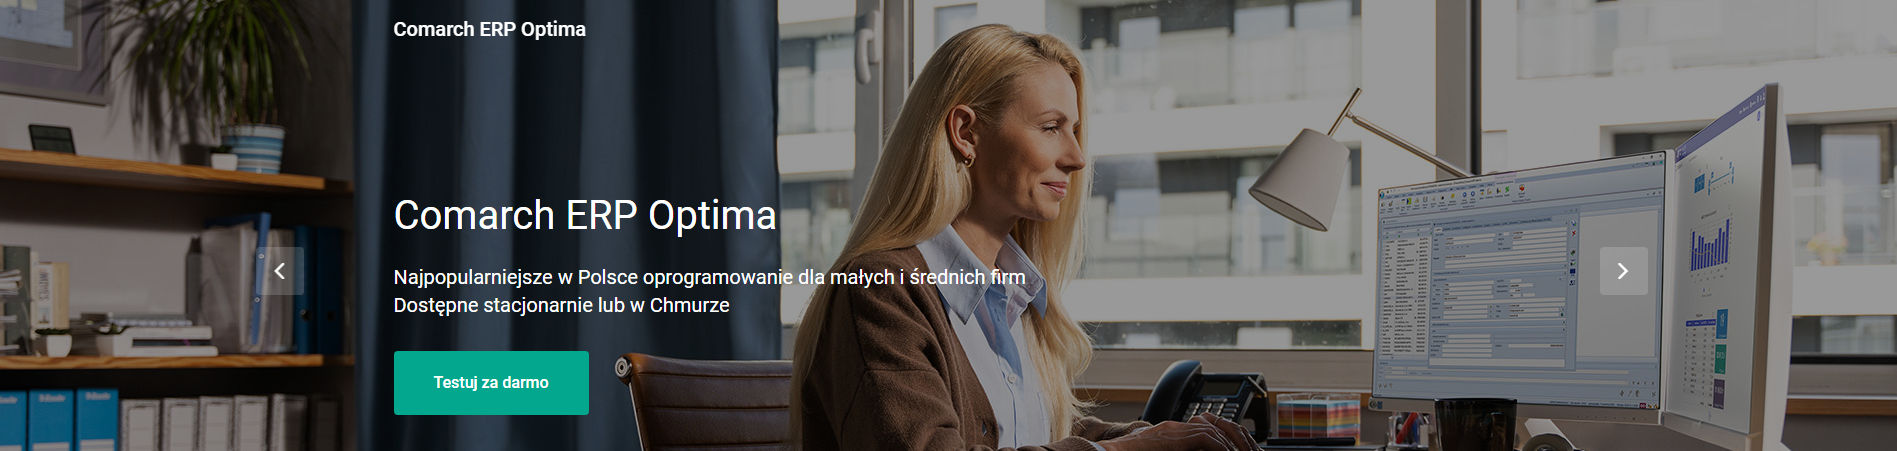 Comarch ERP Optima - systey ERP